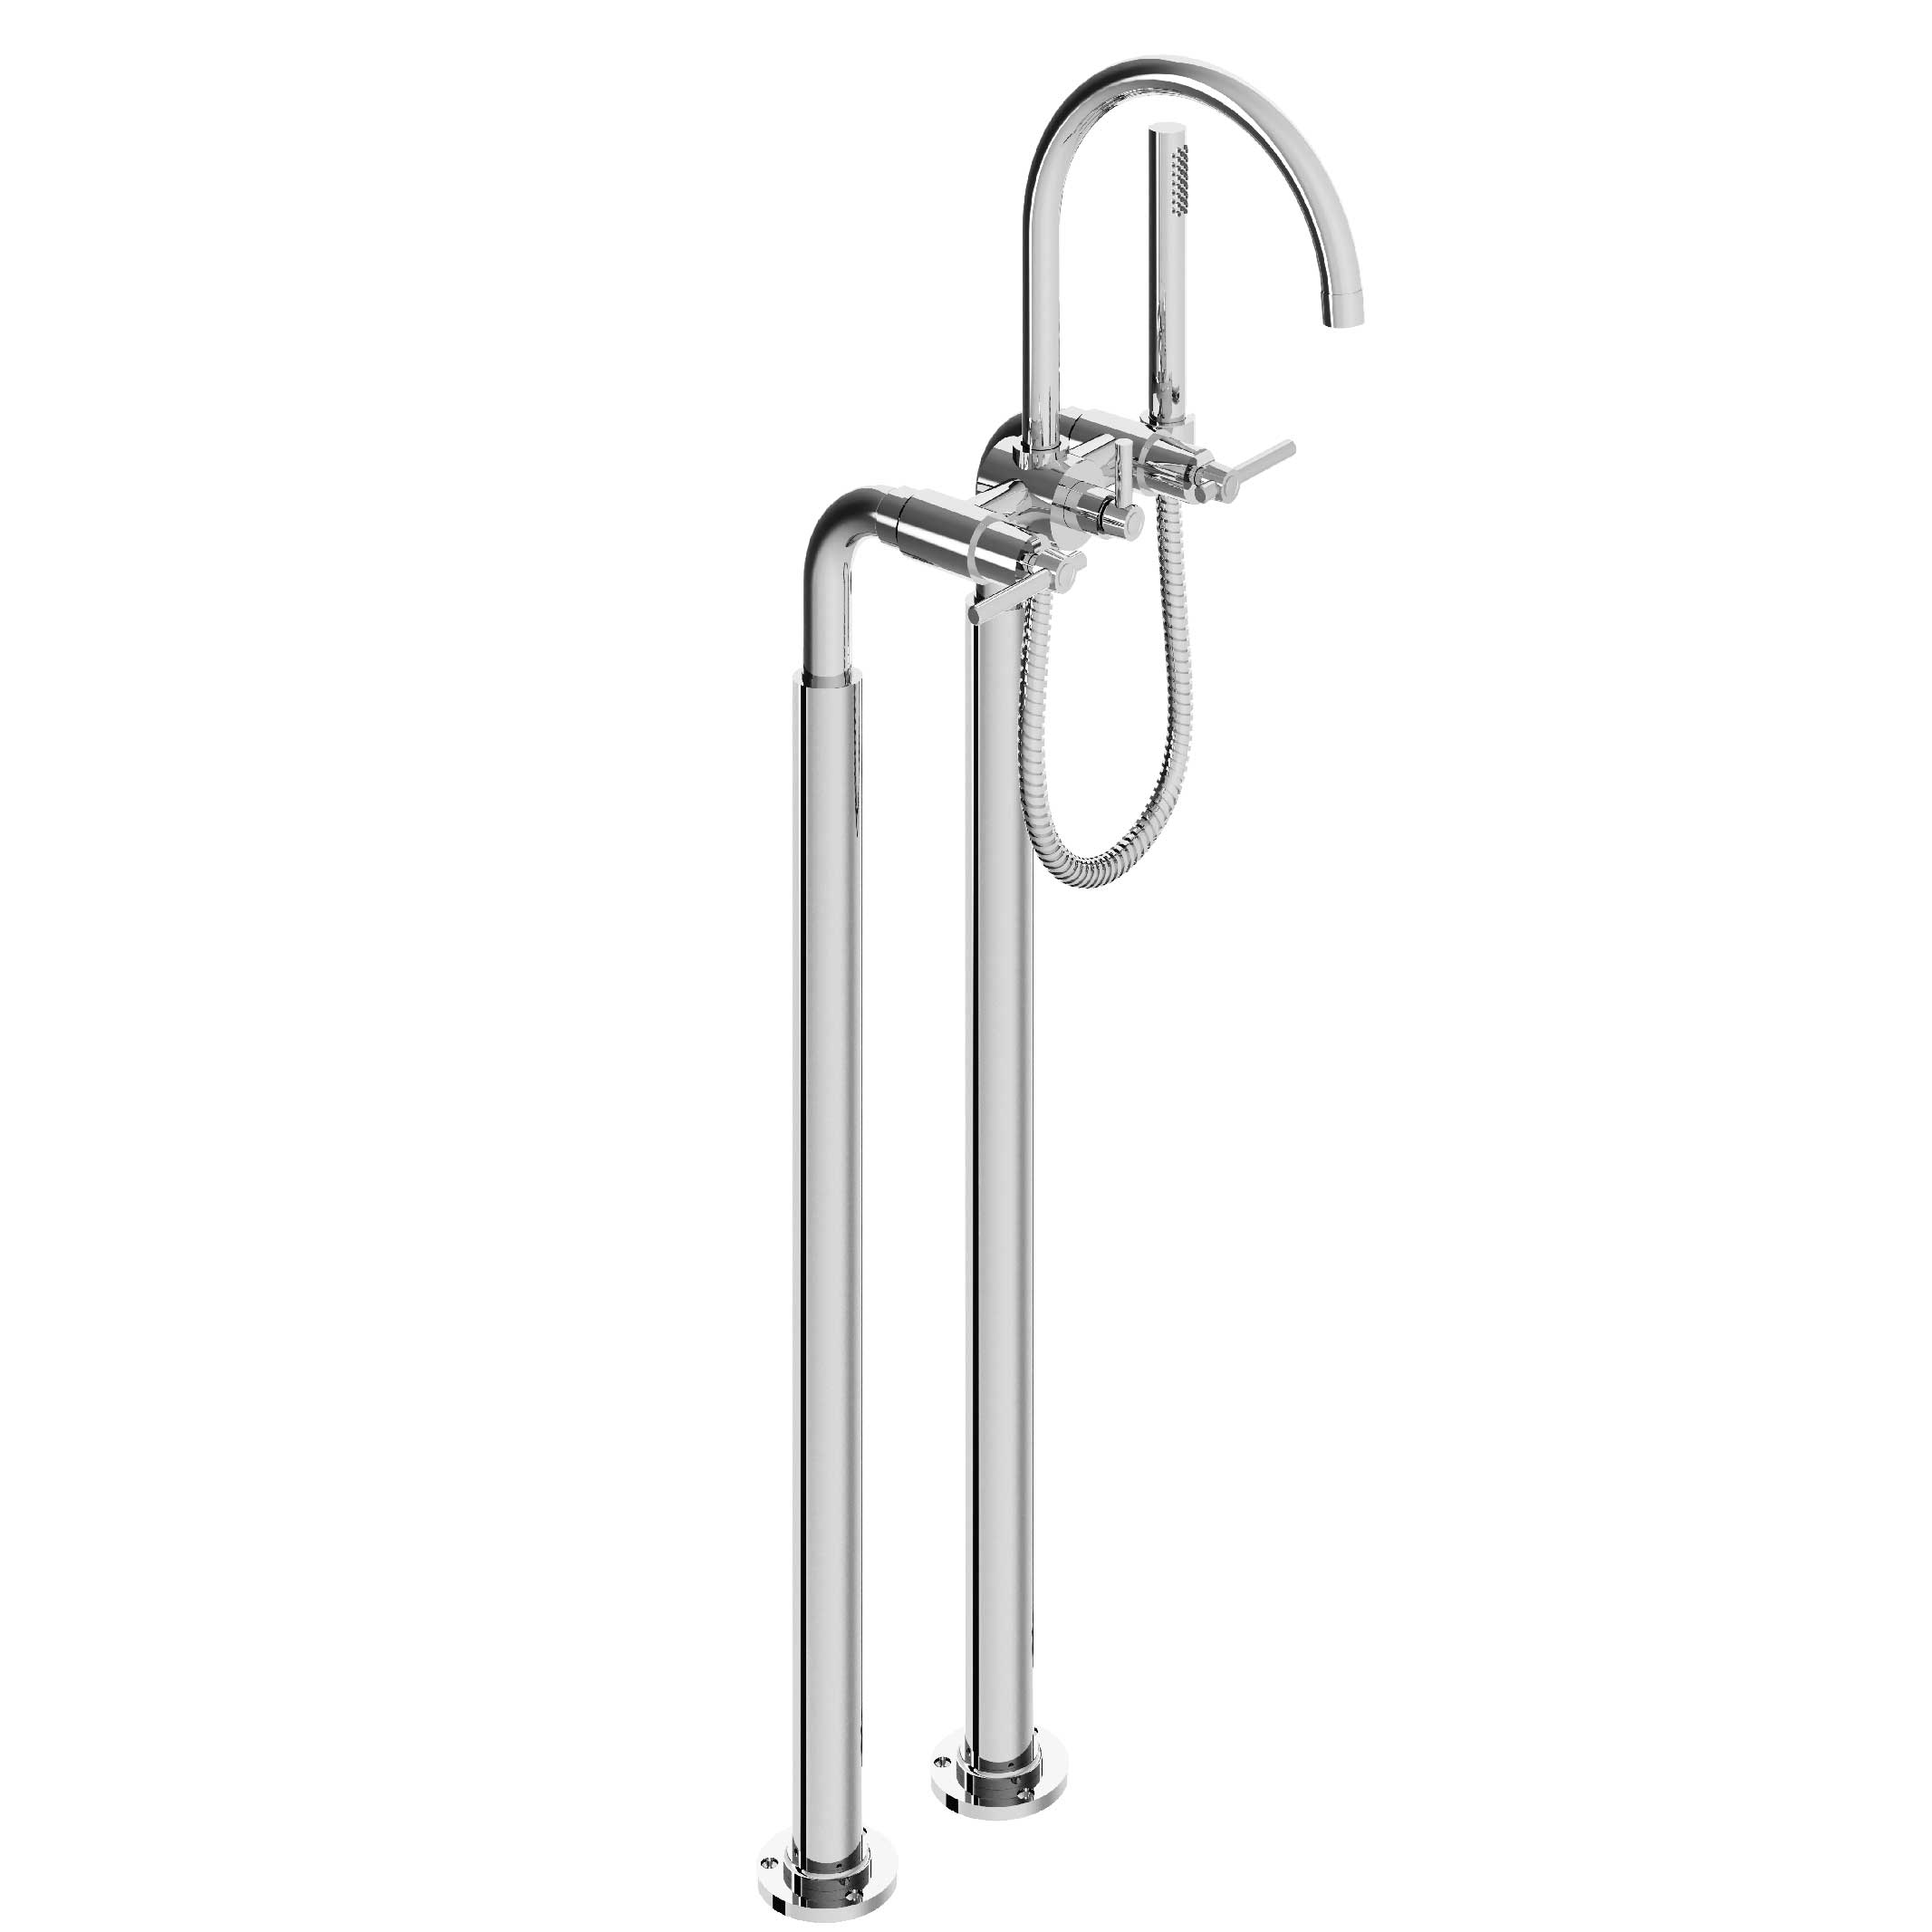 M91-3309 Floor mounted bath and shower mixer